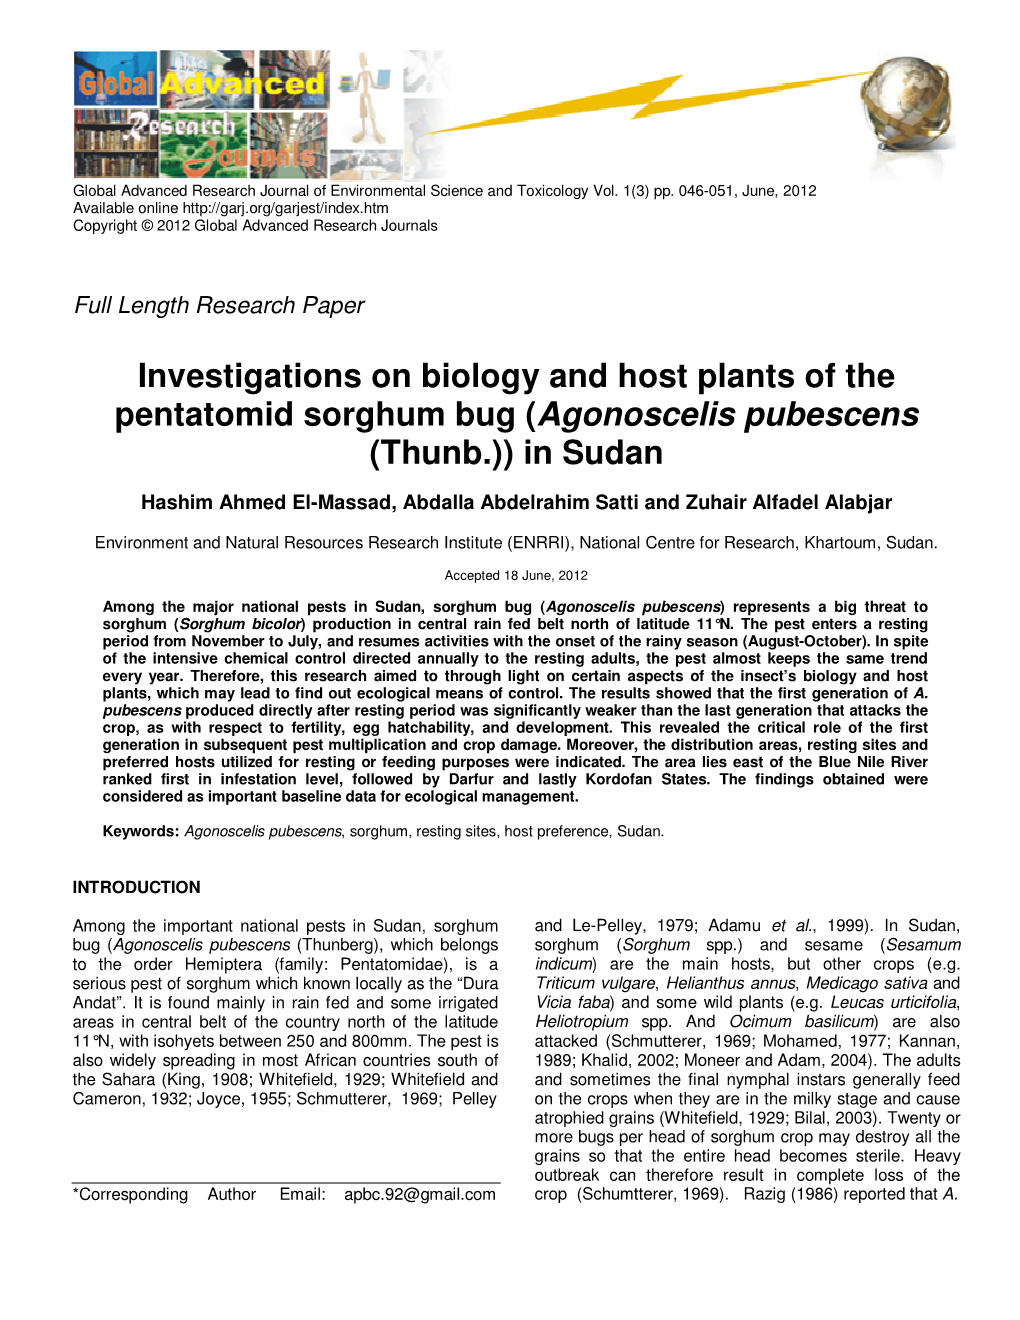 Investigations on Biology and Host Plants of the Pentatomid Sorghum Bug (Agonoscelis Pubescens (Thunb.)) in Sudan